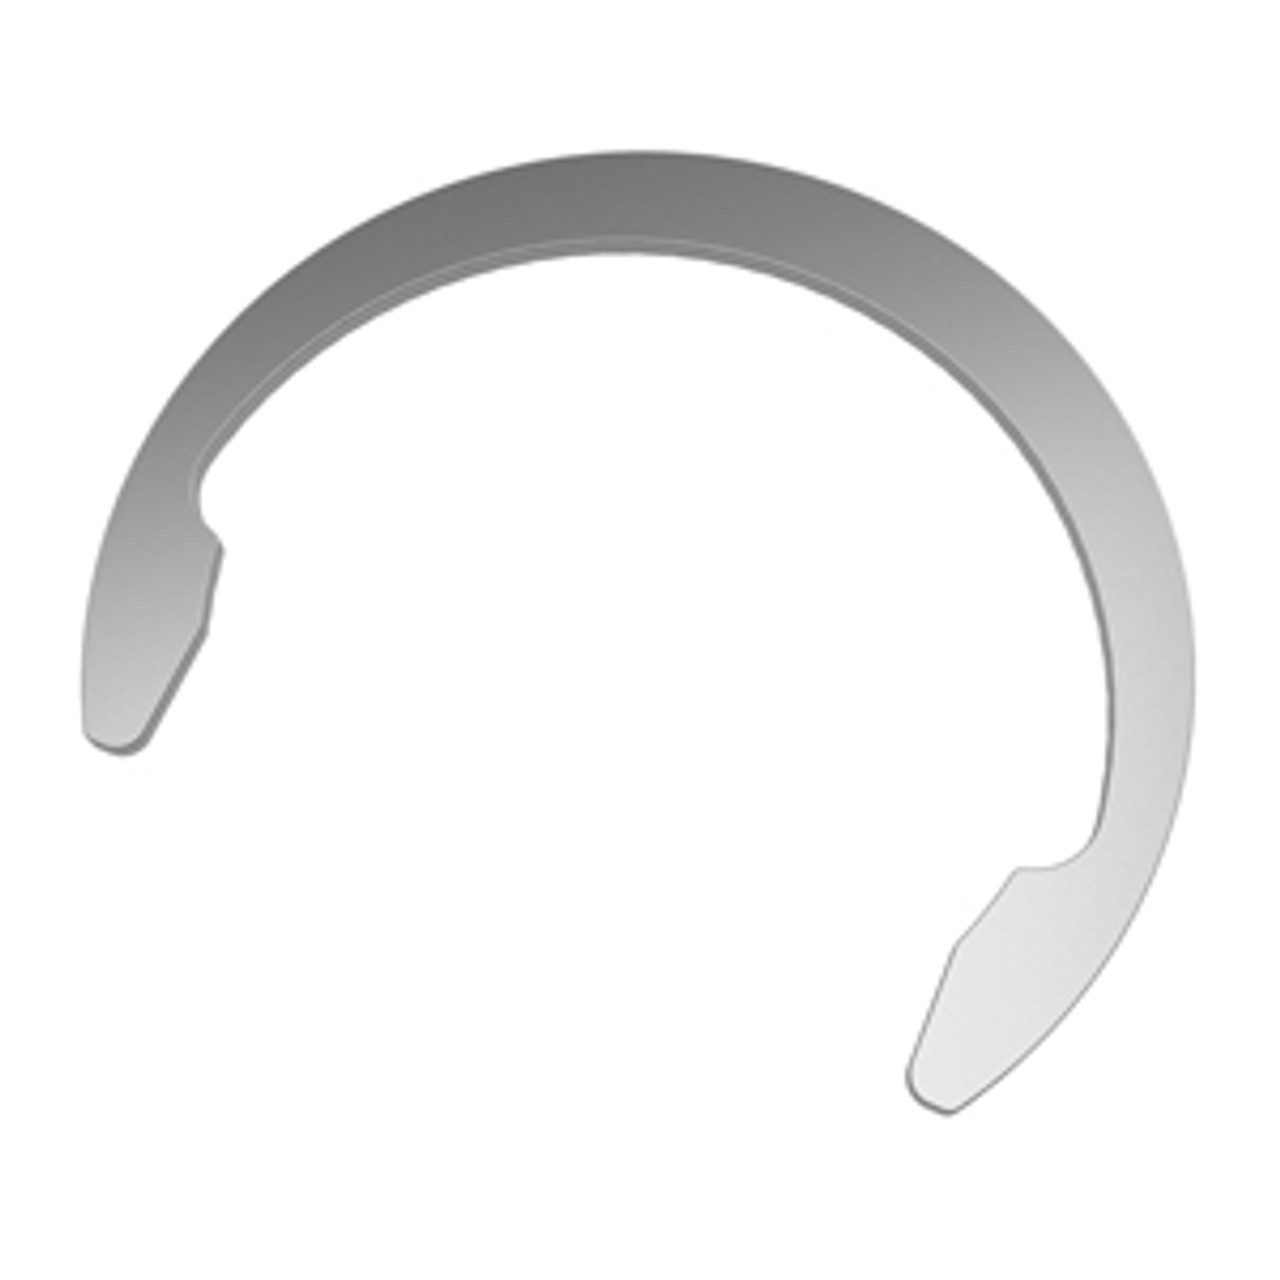 External SAE Phosphated Low Profile Crescent Retaining Ring  C-0012-PA